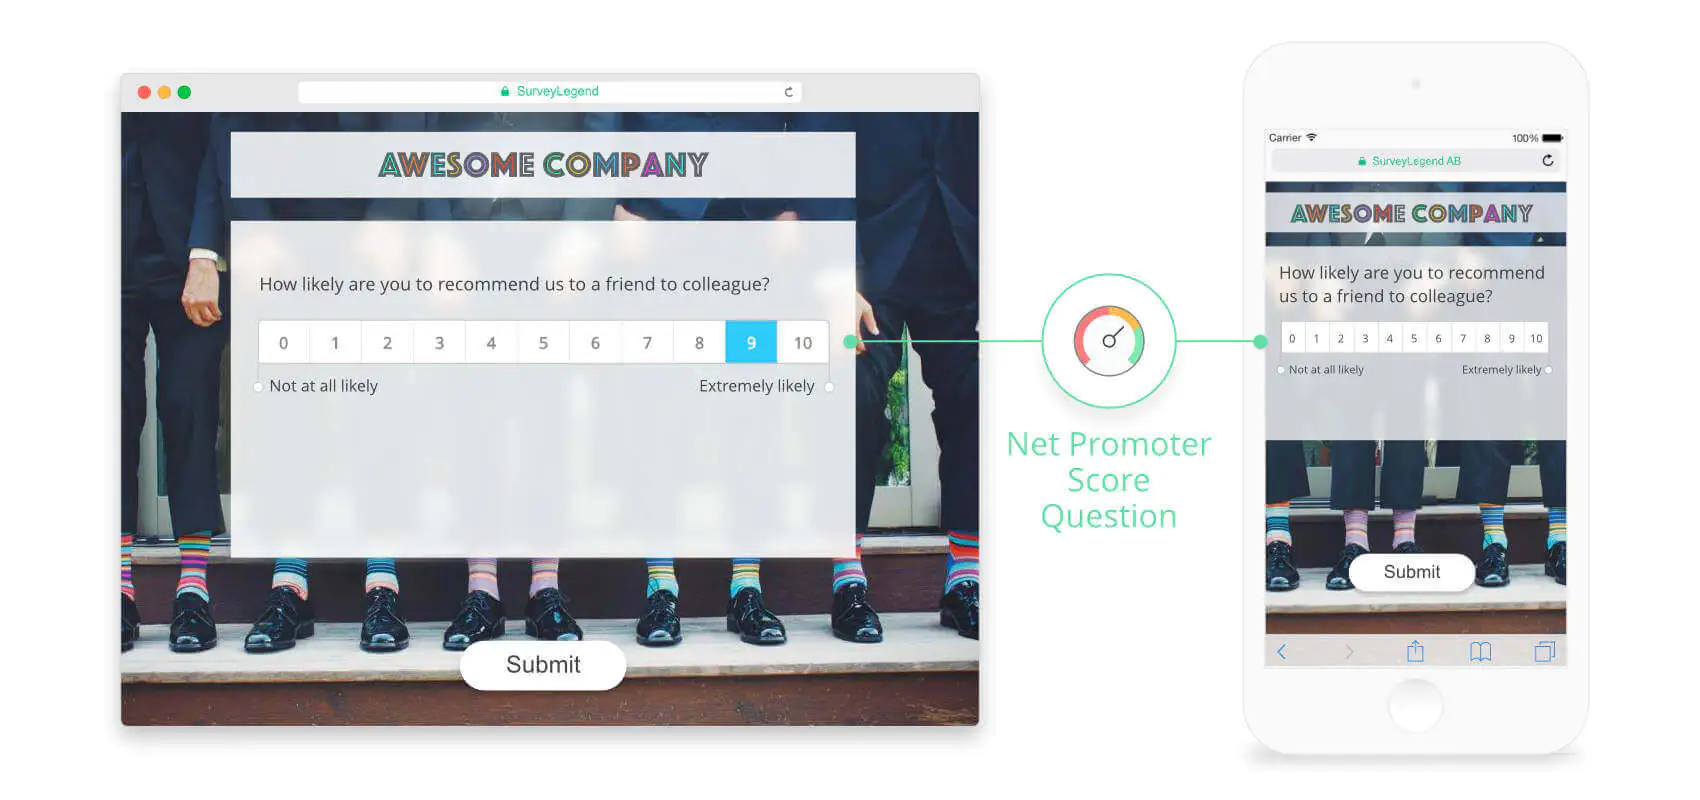 Our Net Promoter Score question is designed to work perfectly on mobile devices.